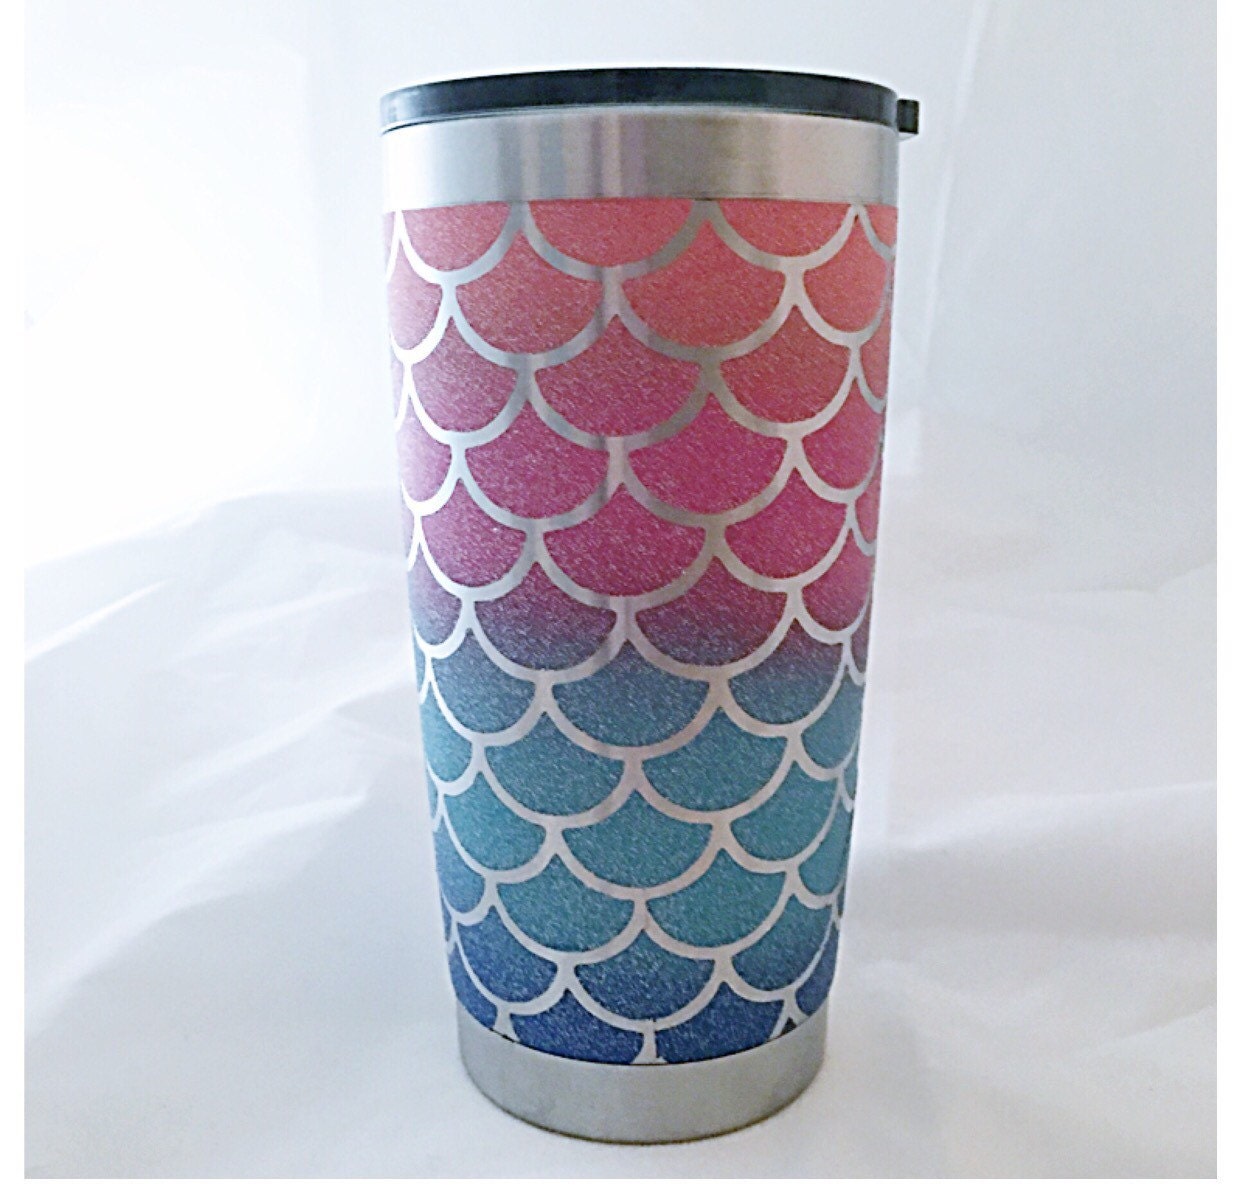 tumbler template design stainless a Cup Steel can't mermaid Scales be Mermaid